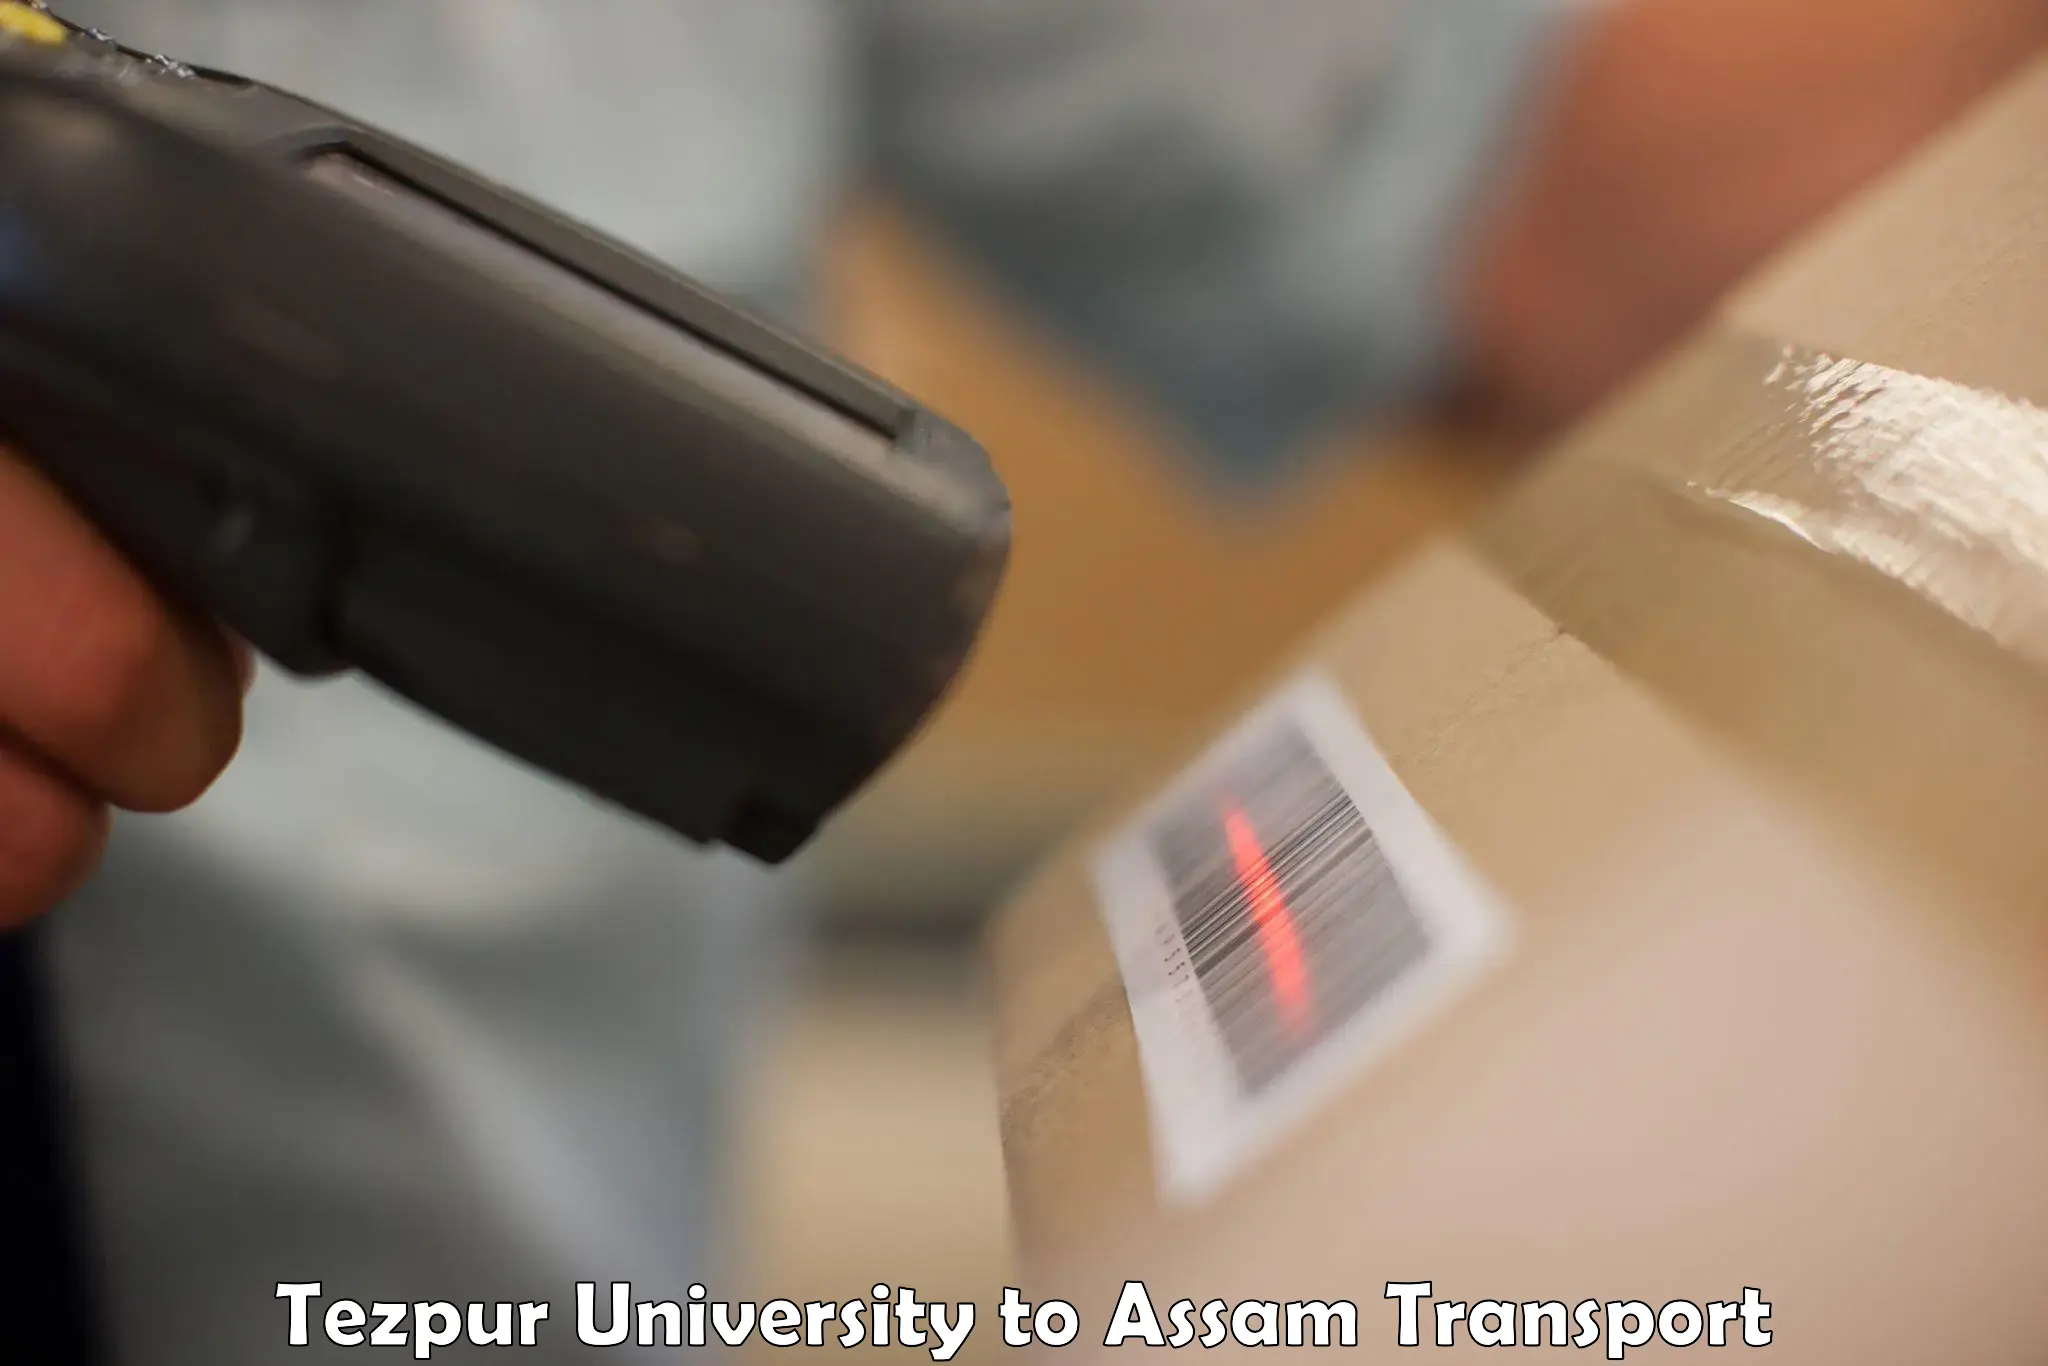 Truck transport companies in India in Tezpur University to Assam